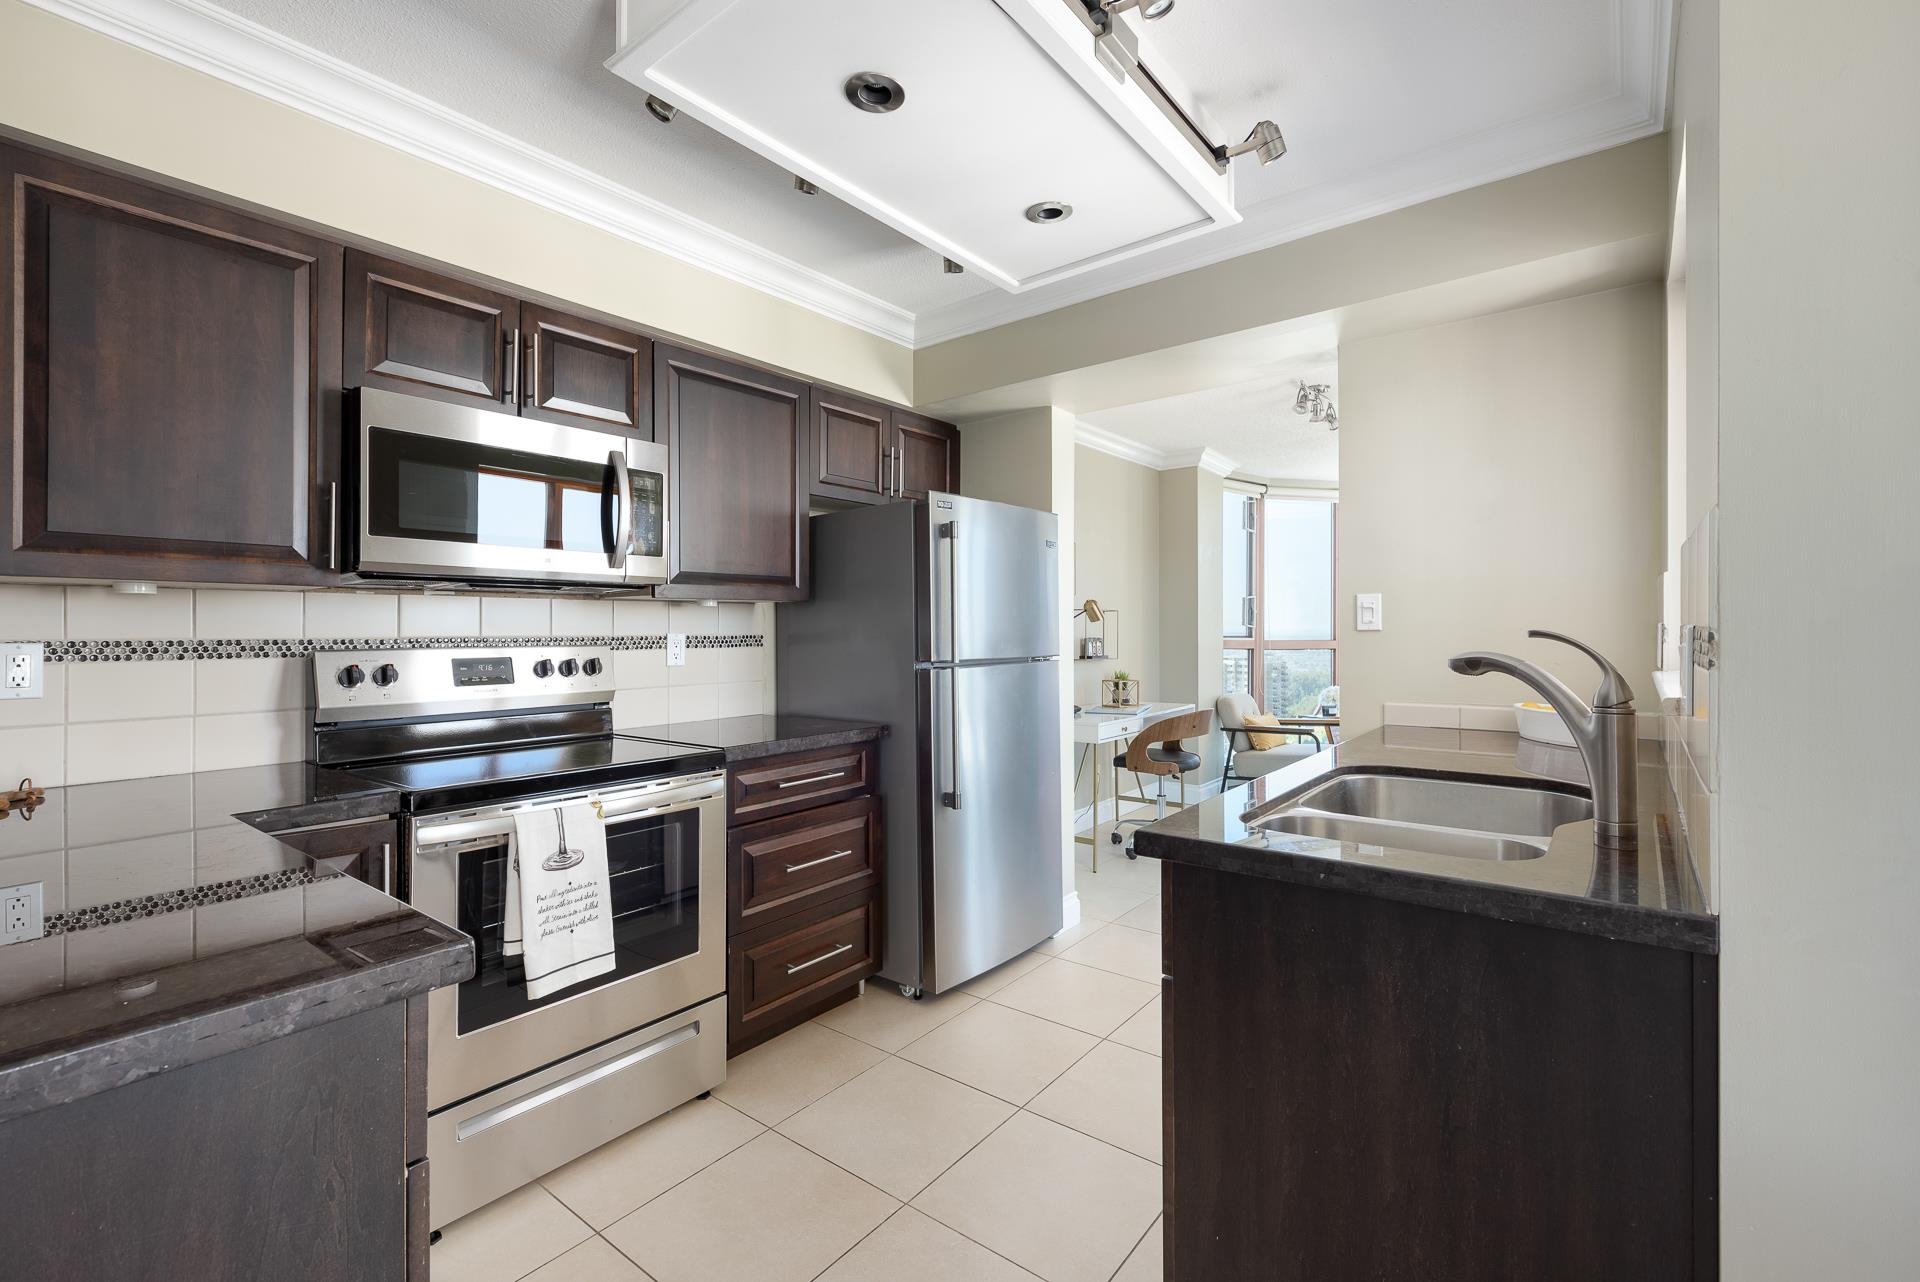 1504 612 Fifth Avenue, Uptown - r2874820 Image